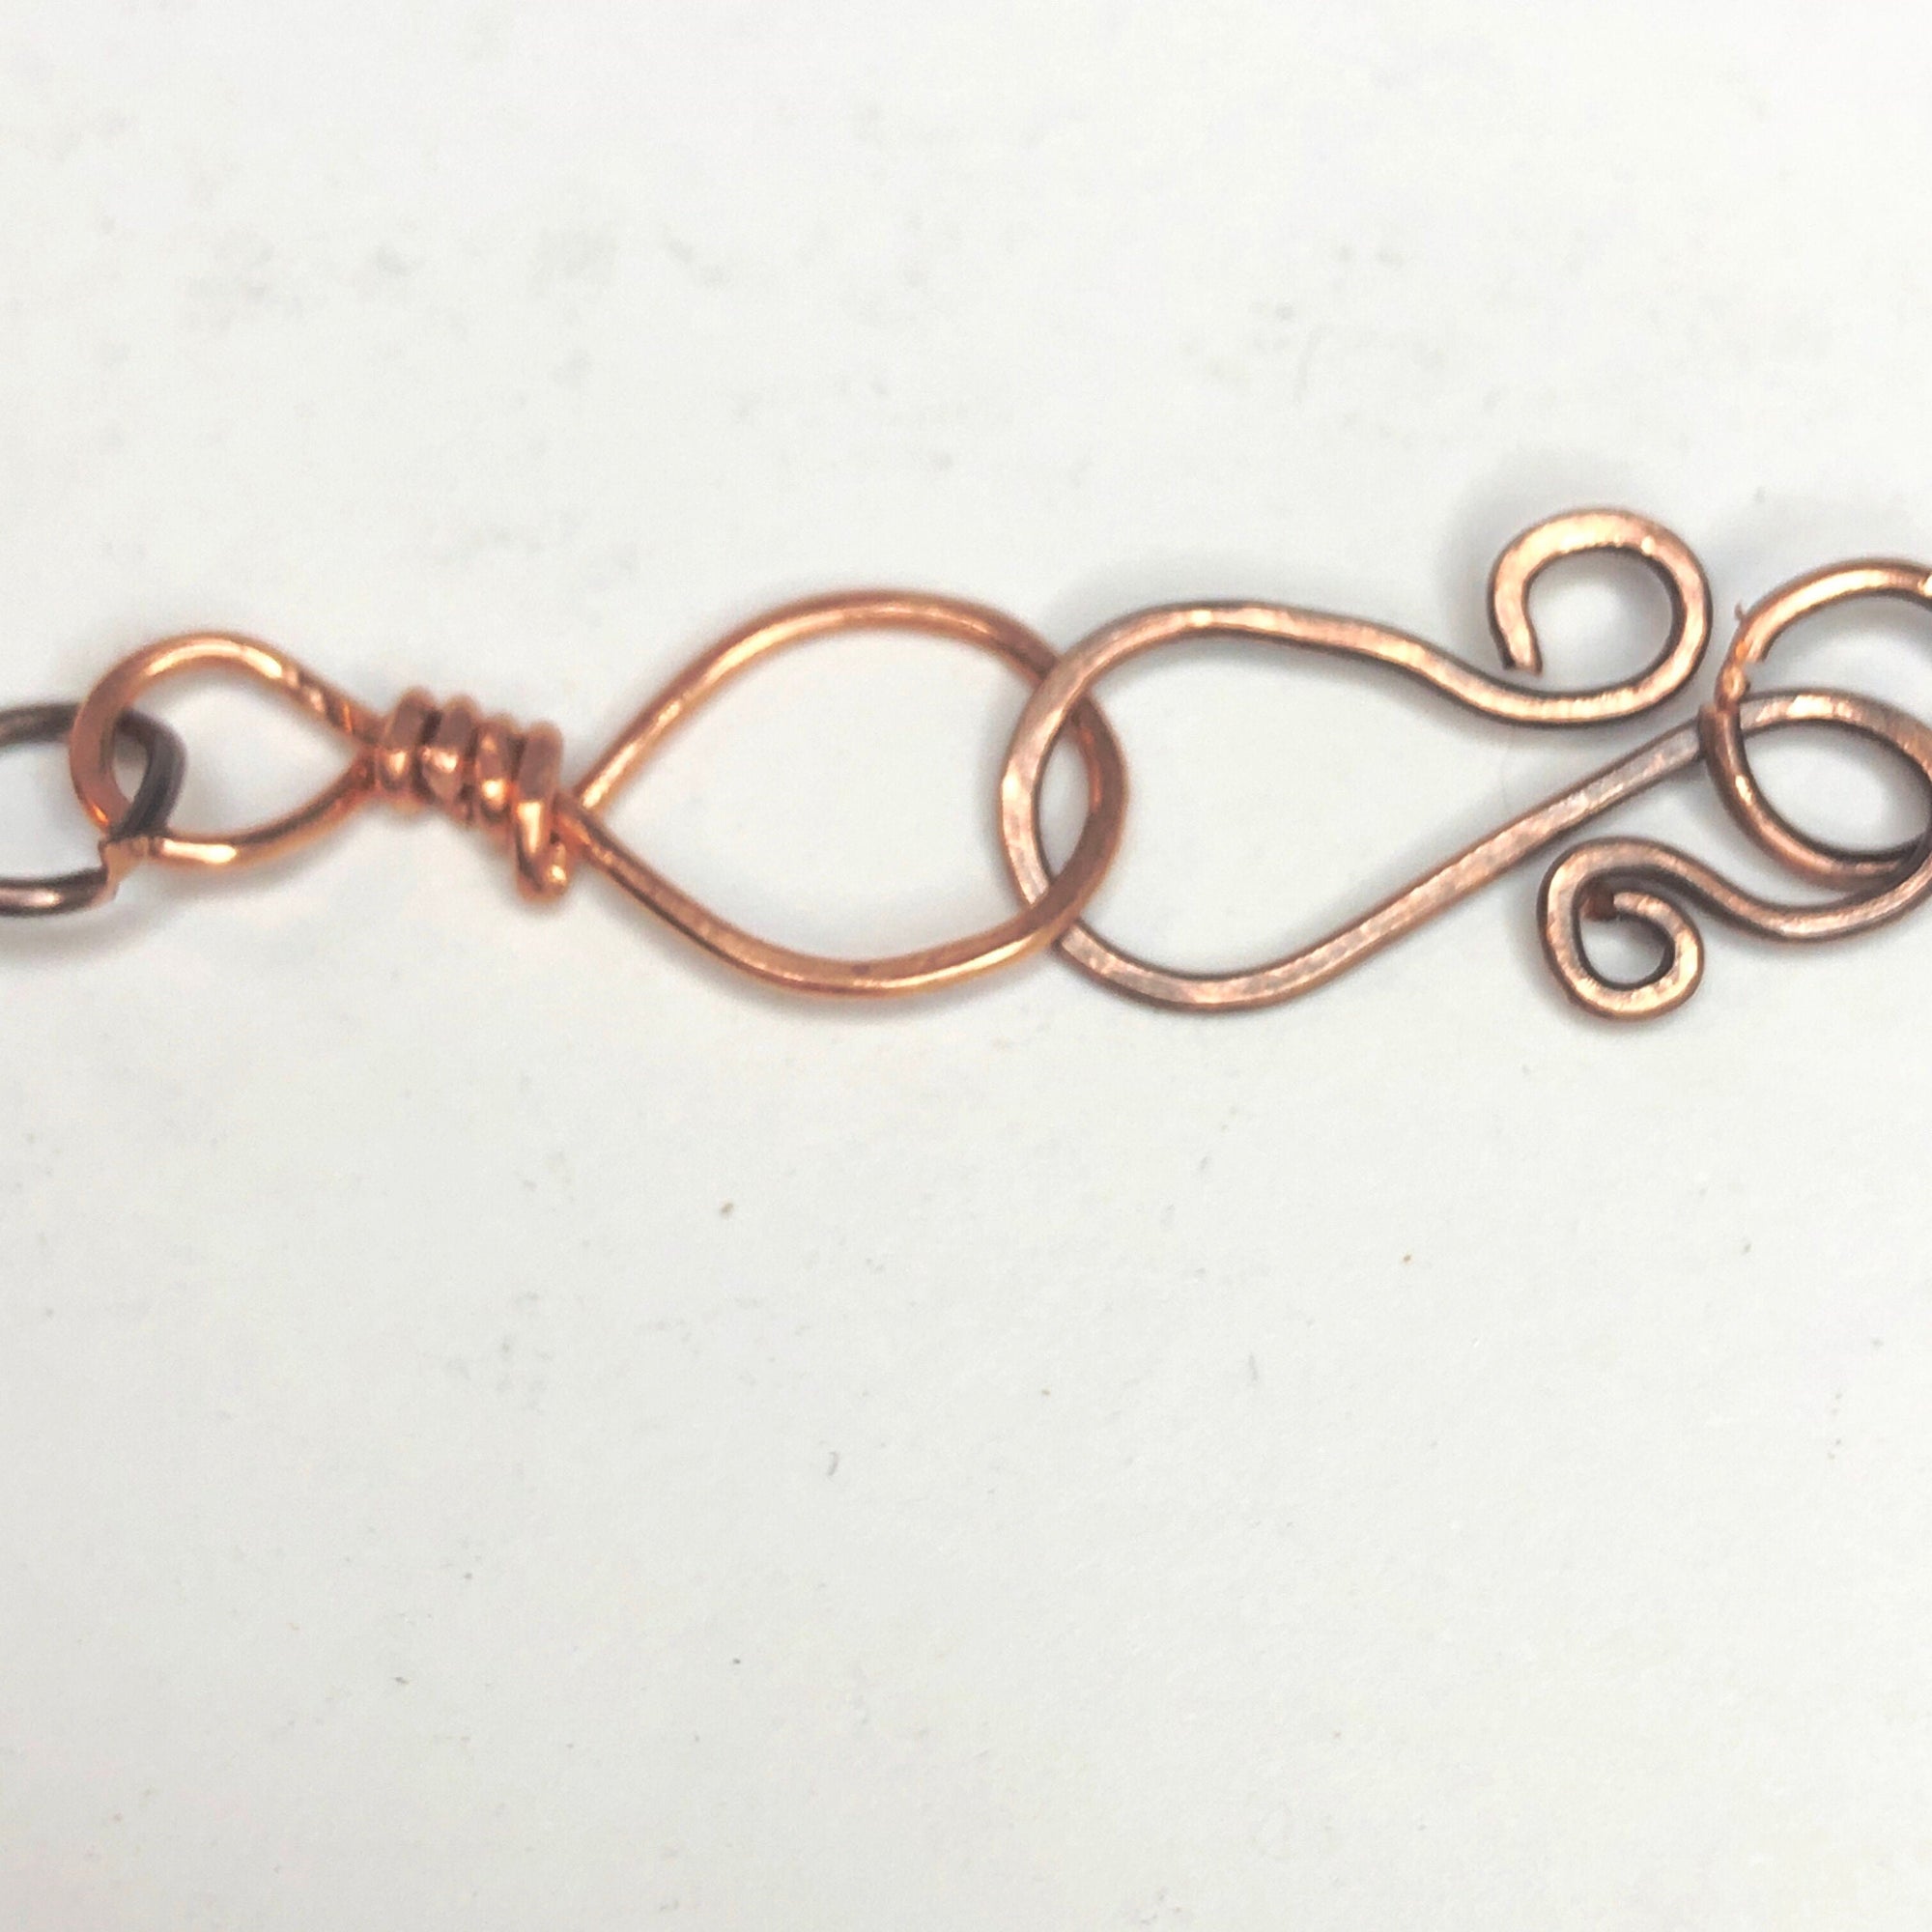 Wishbone necklace charm ring holder, Rose gold copper wedding ring holder, Good luck lucky charm nurse gift, doctor gift, gold silver copper